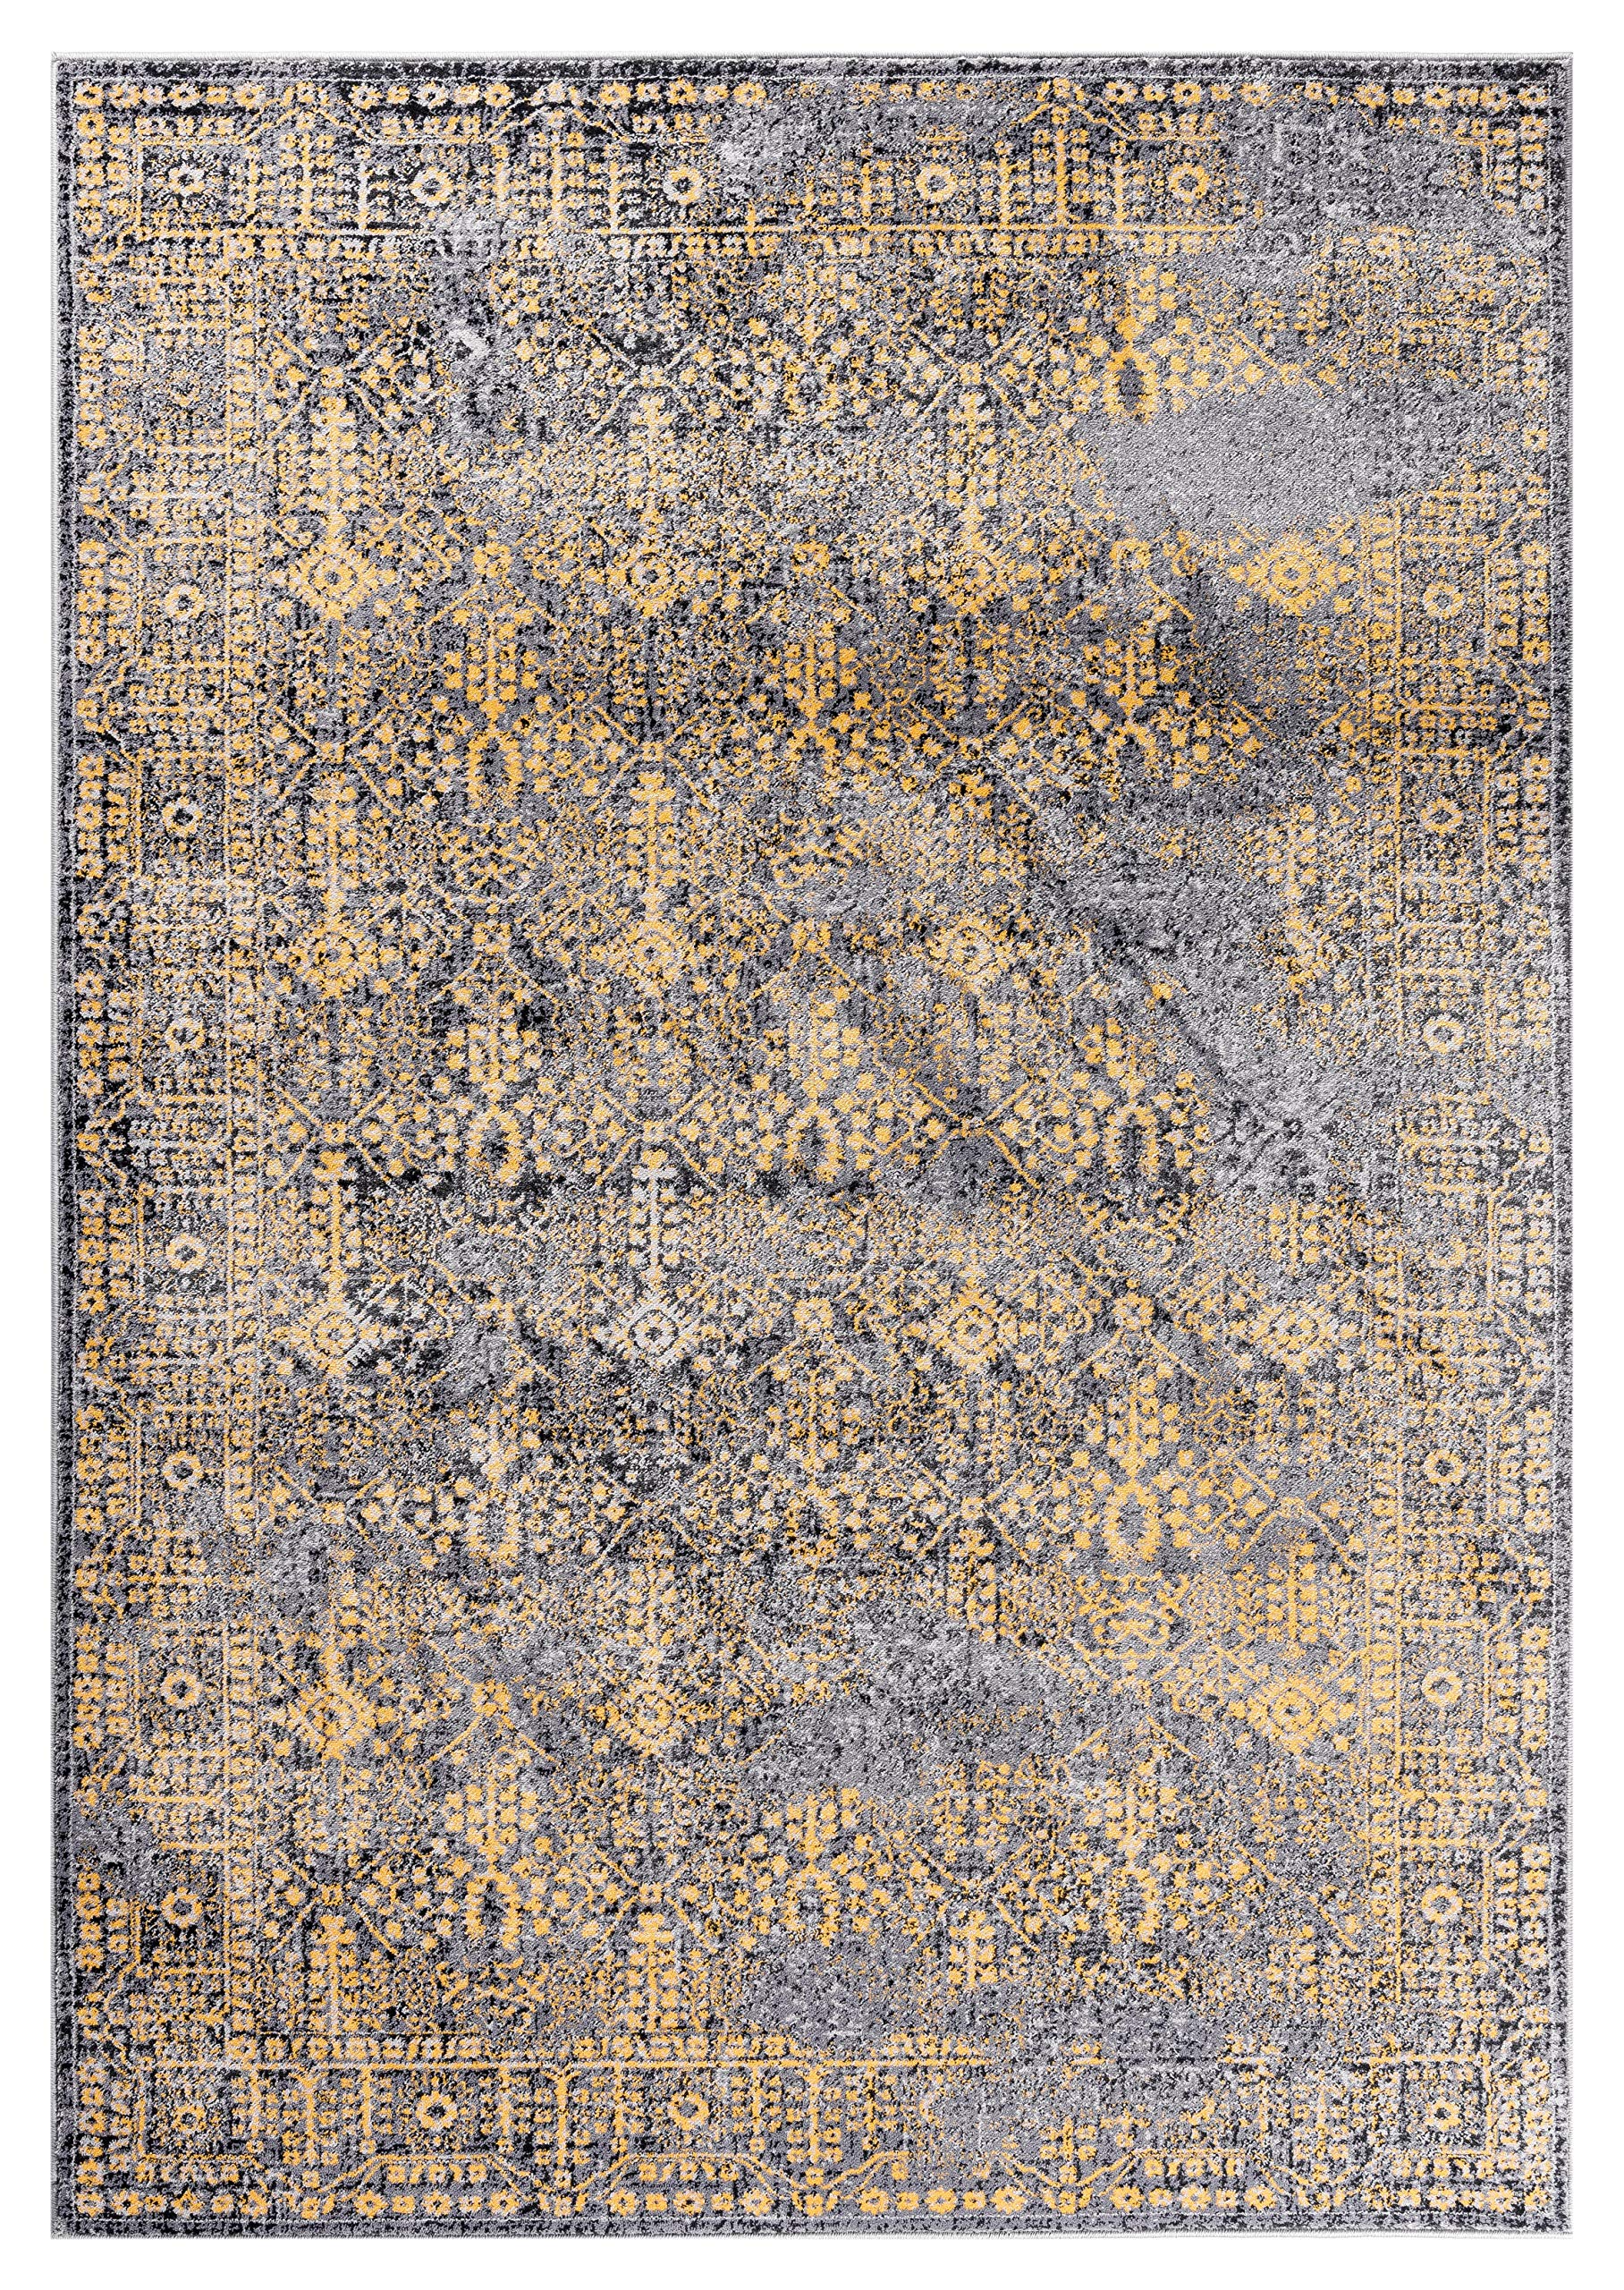 GAD Premium Indoor Contemporary Oriental Vintage Distressed Area Rug (5'3"x 7'6") Grey, Black & Yellow Abstract Living Room Rug - Hallway, High Traffic Inside Rug - Stain & Fade Resistant - image 4 of 5